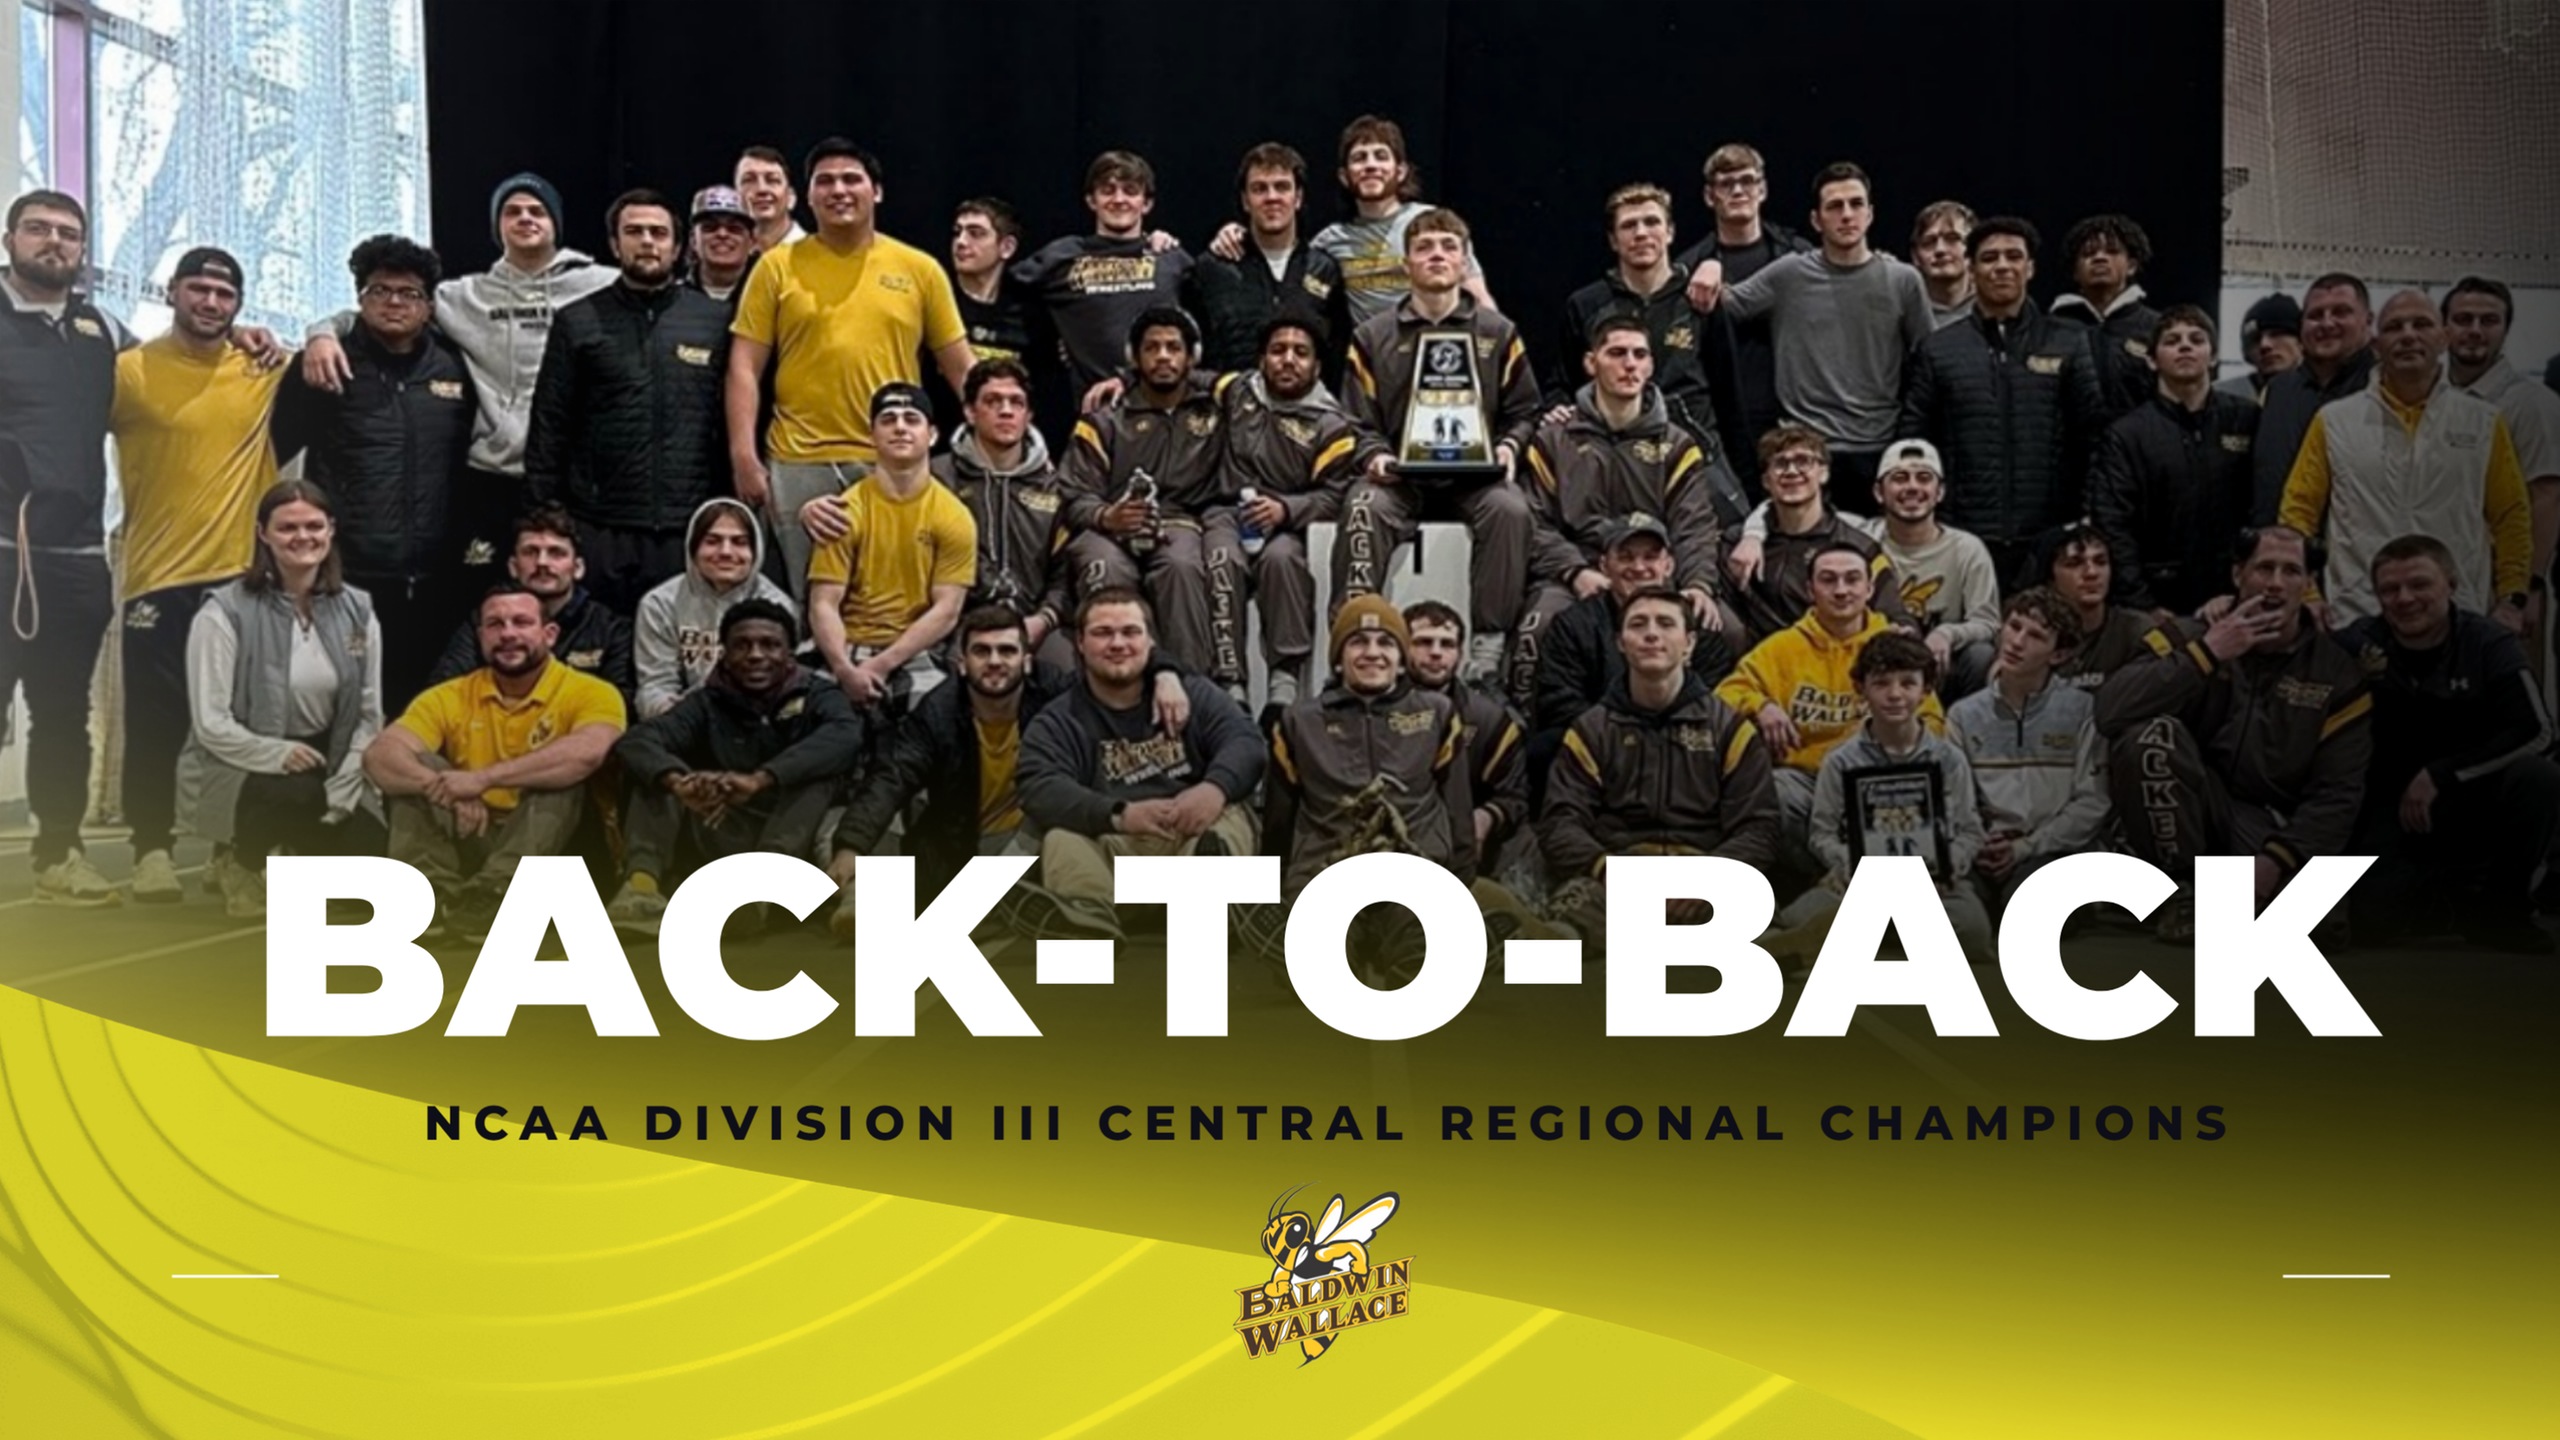 BW Wrestling Wins NCAA Central Regional Championship For Second Consecutive Year